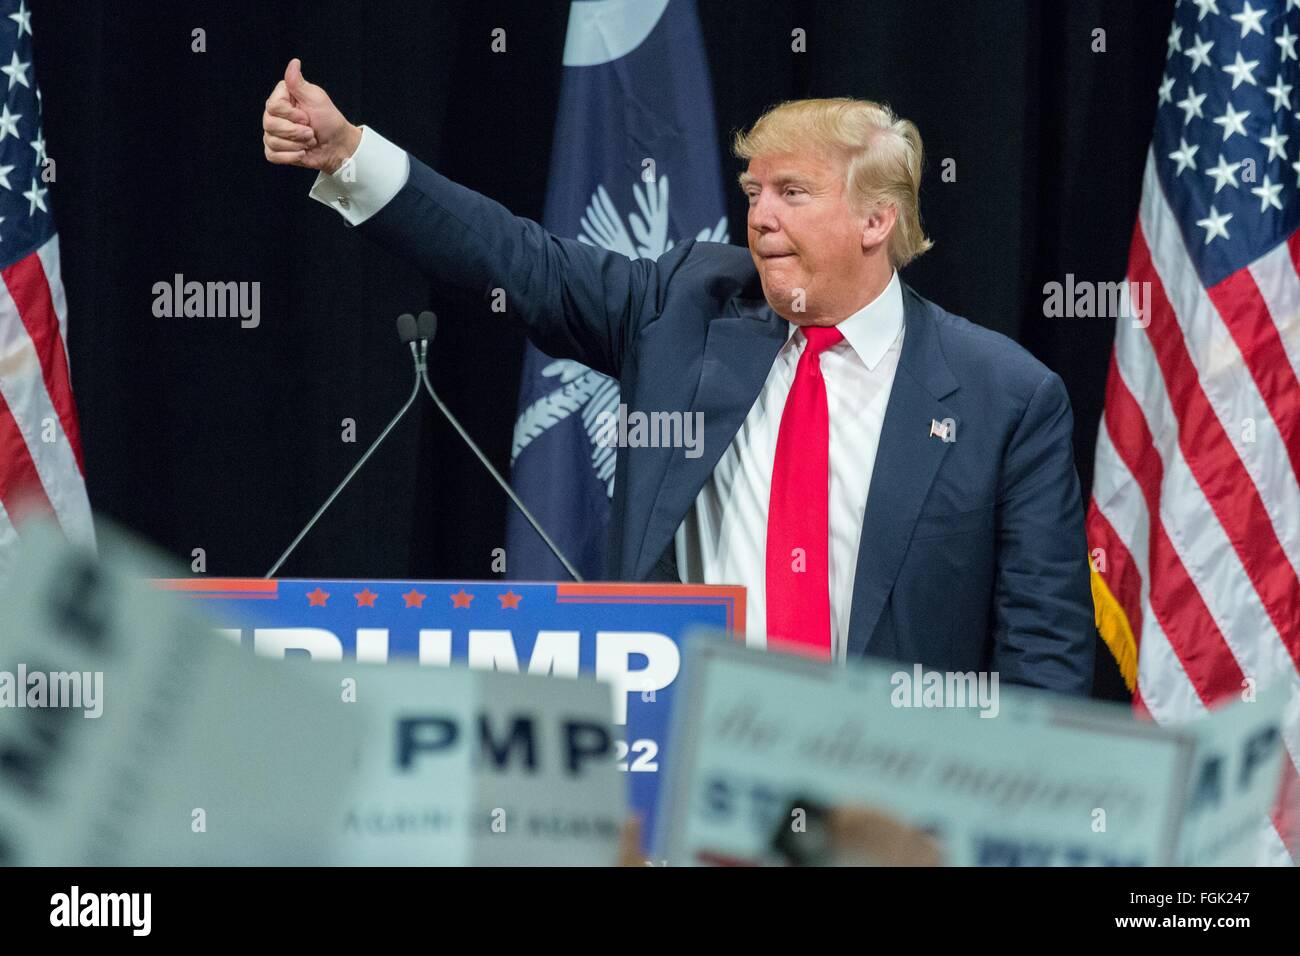 Myrtle Beach, South Carolina, USA. 19th February, 2016. Billionaire and GOP presidential candidate Donald Trump thanks supporters after addressing a rally on the eve of primary voting February 19, 2016 in Myrtle Beach, South Carolina. The Republican primary vote in South Carolina takes place on Saturday, February 20th. Stock Photo